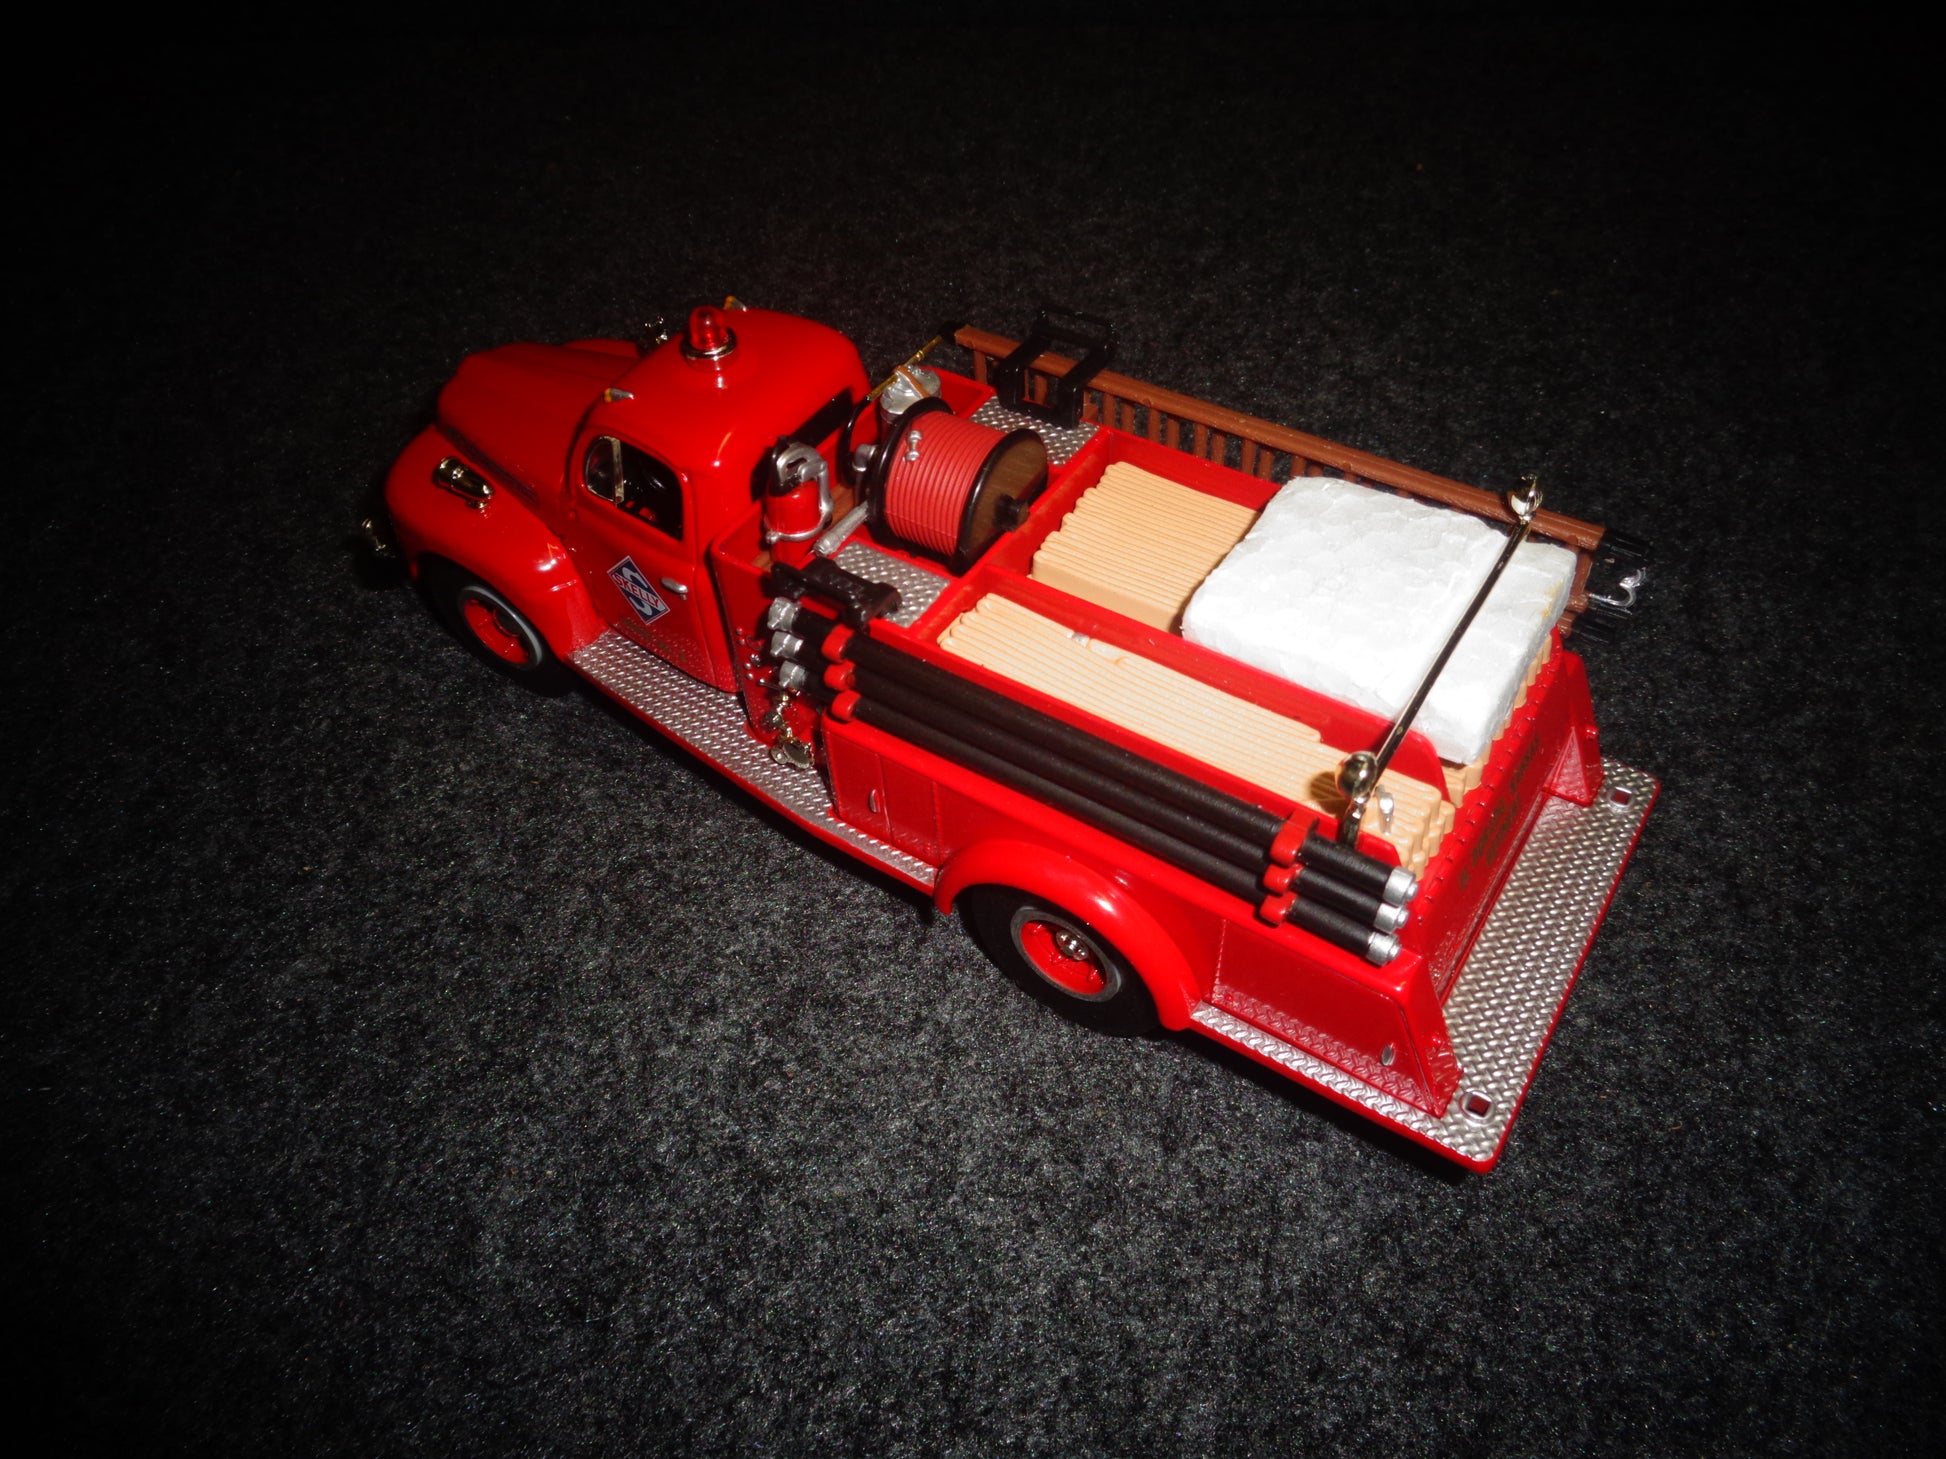 Skelly Oil 1951 Ford F-7 Fire Truck